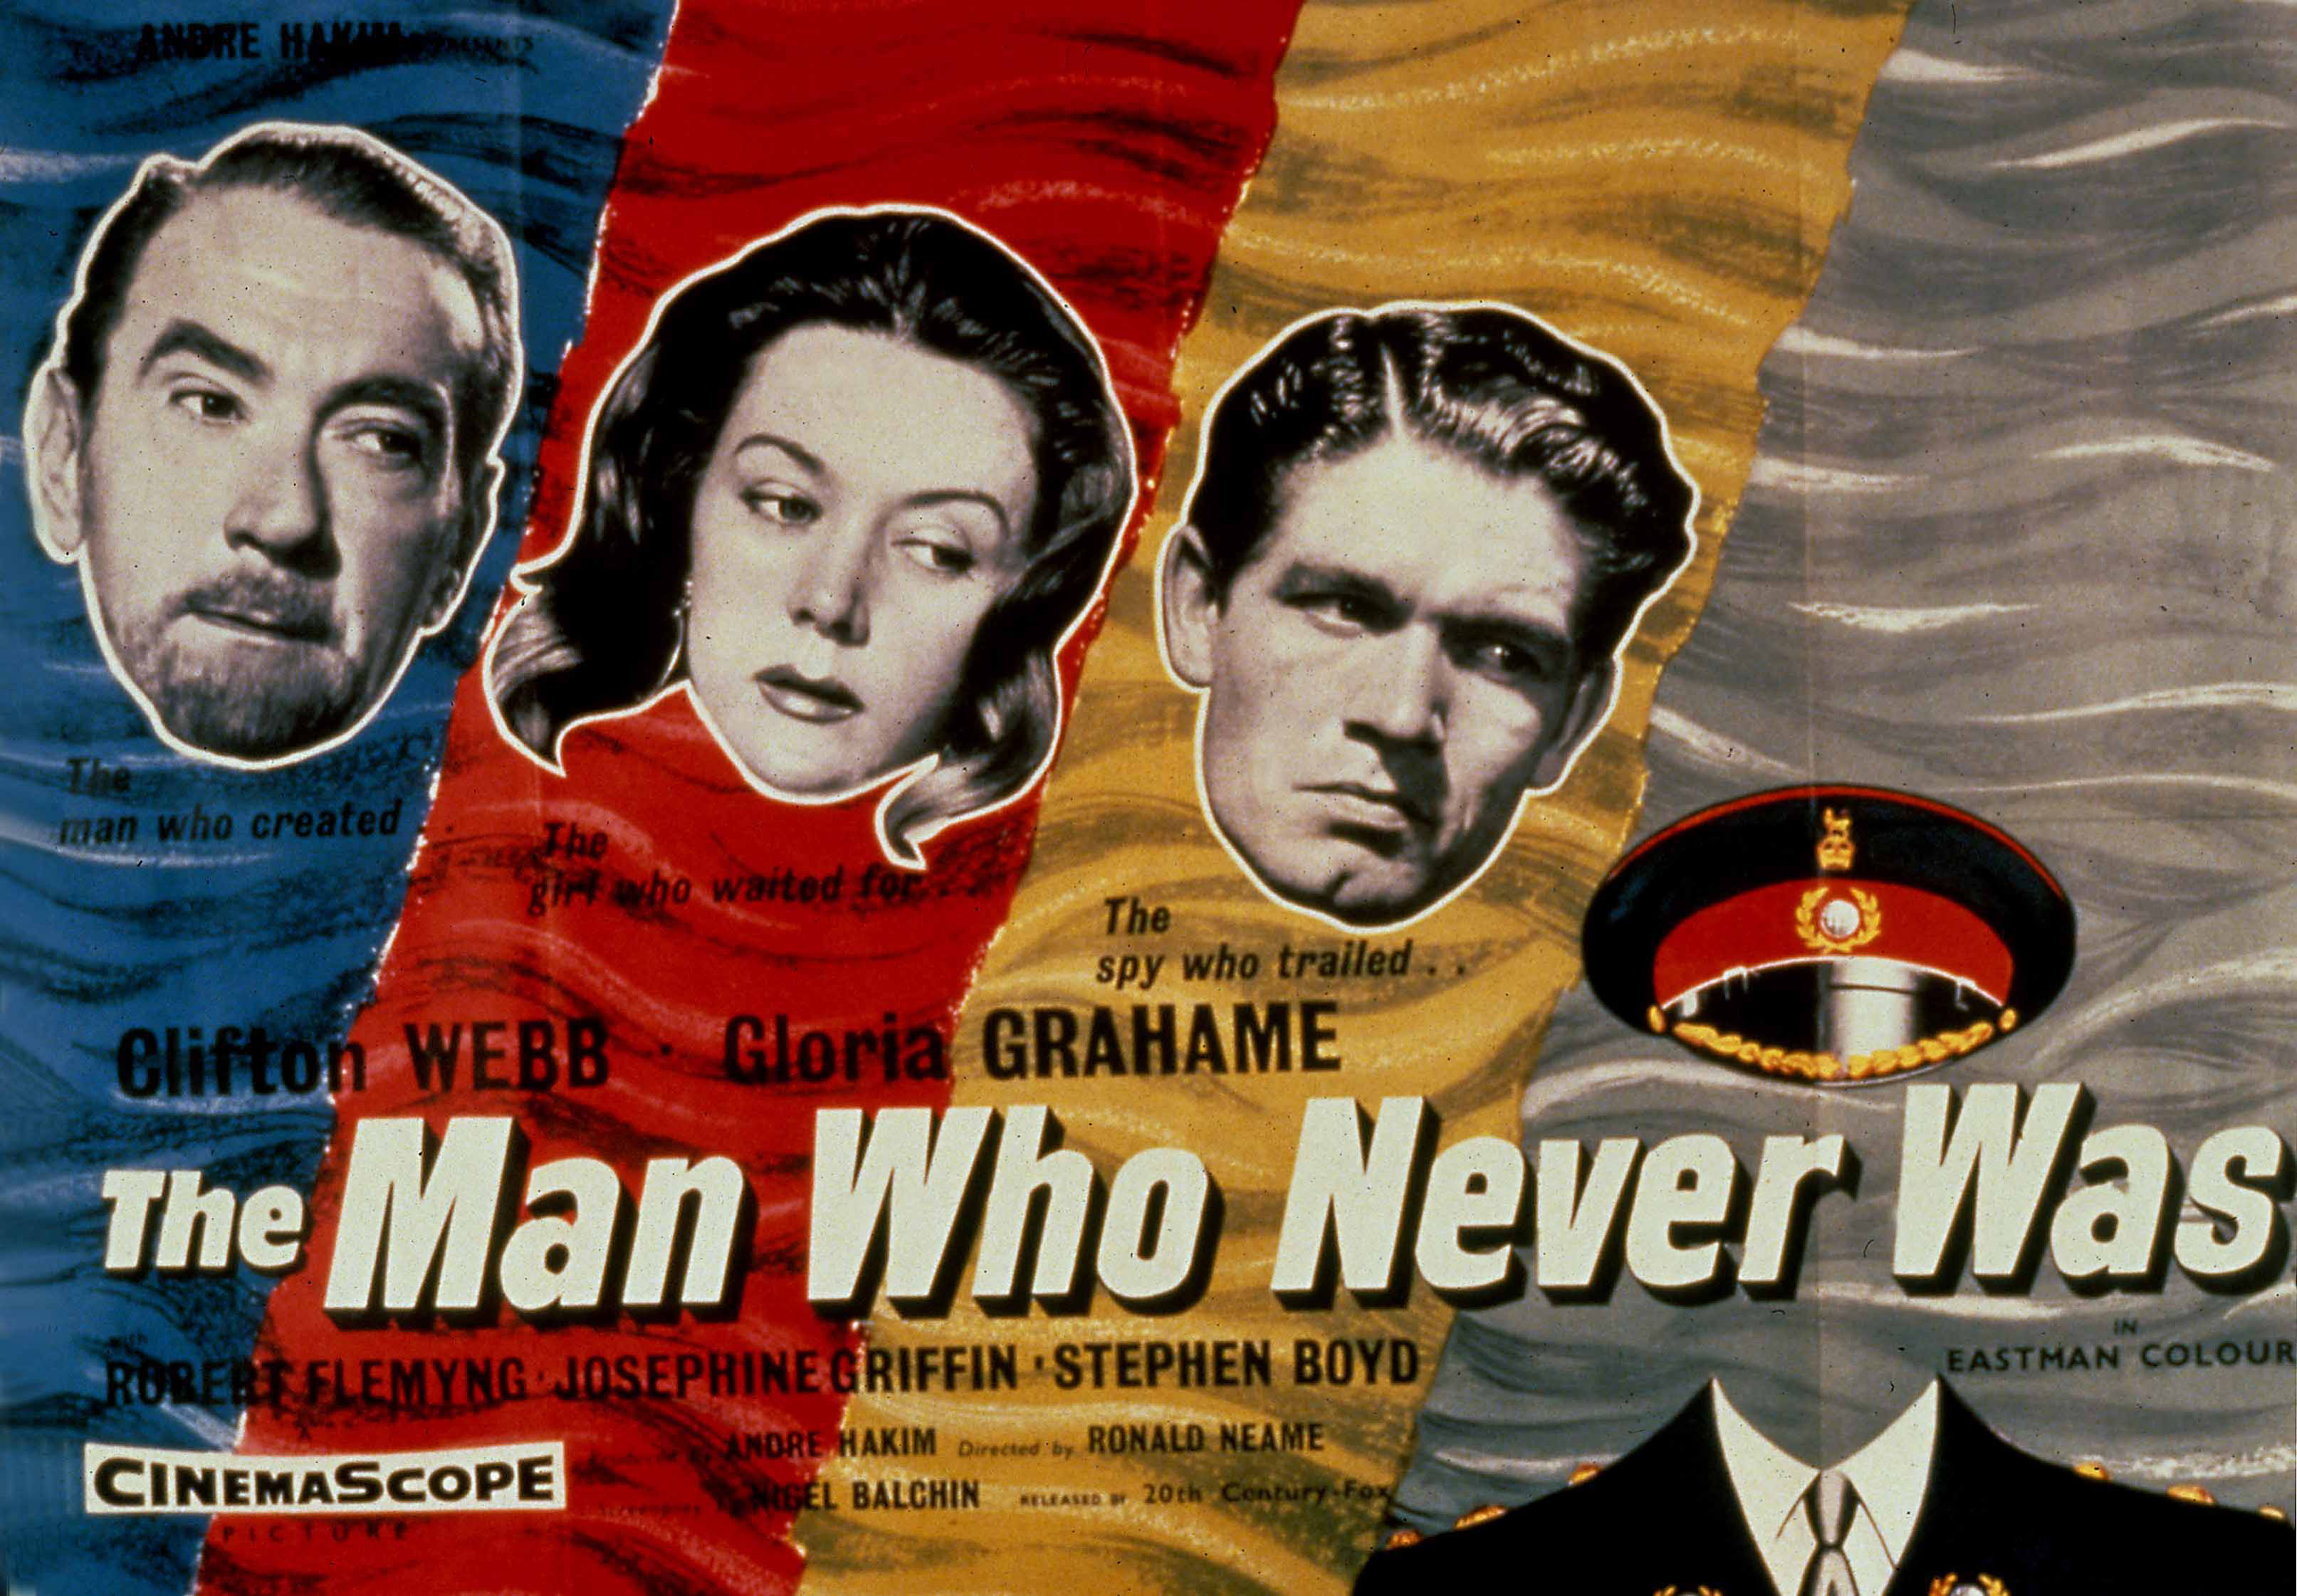 War Movie - The Man Who Never Was (1956)